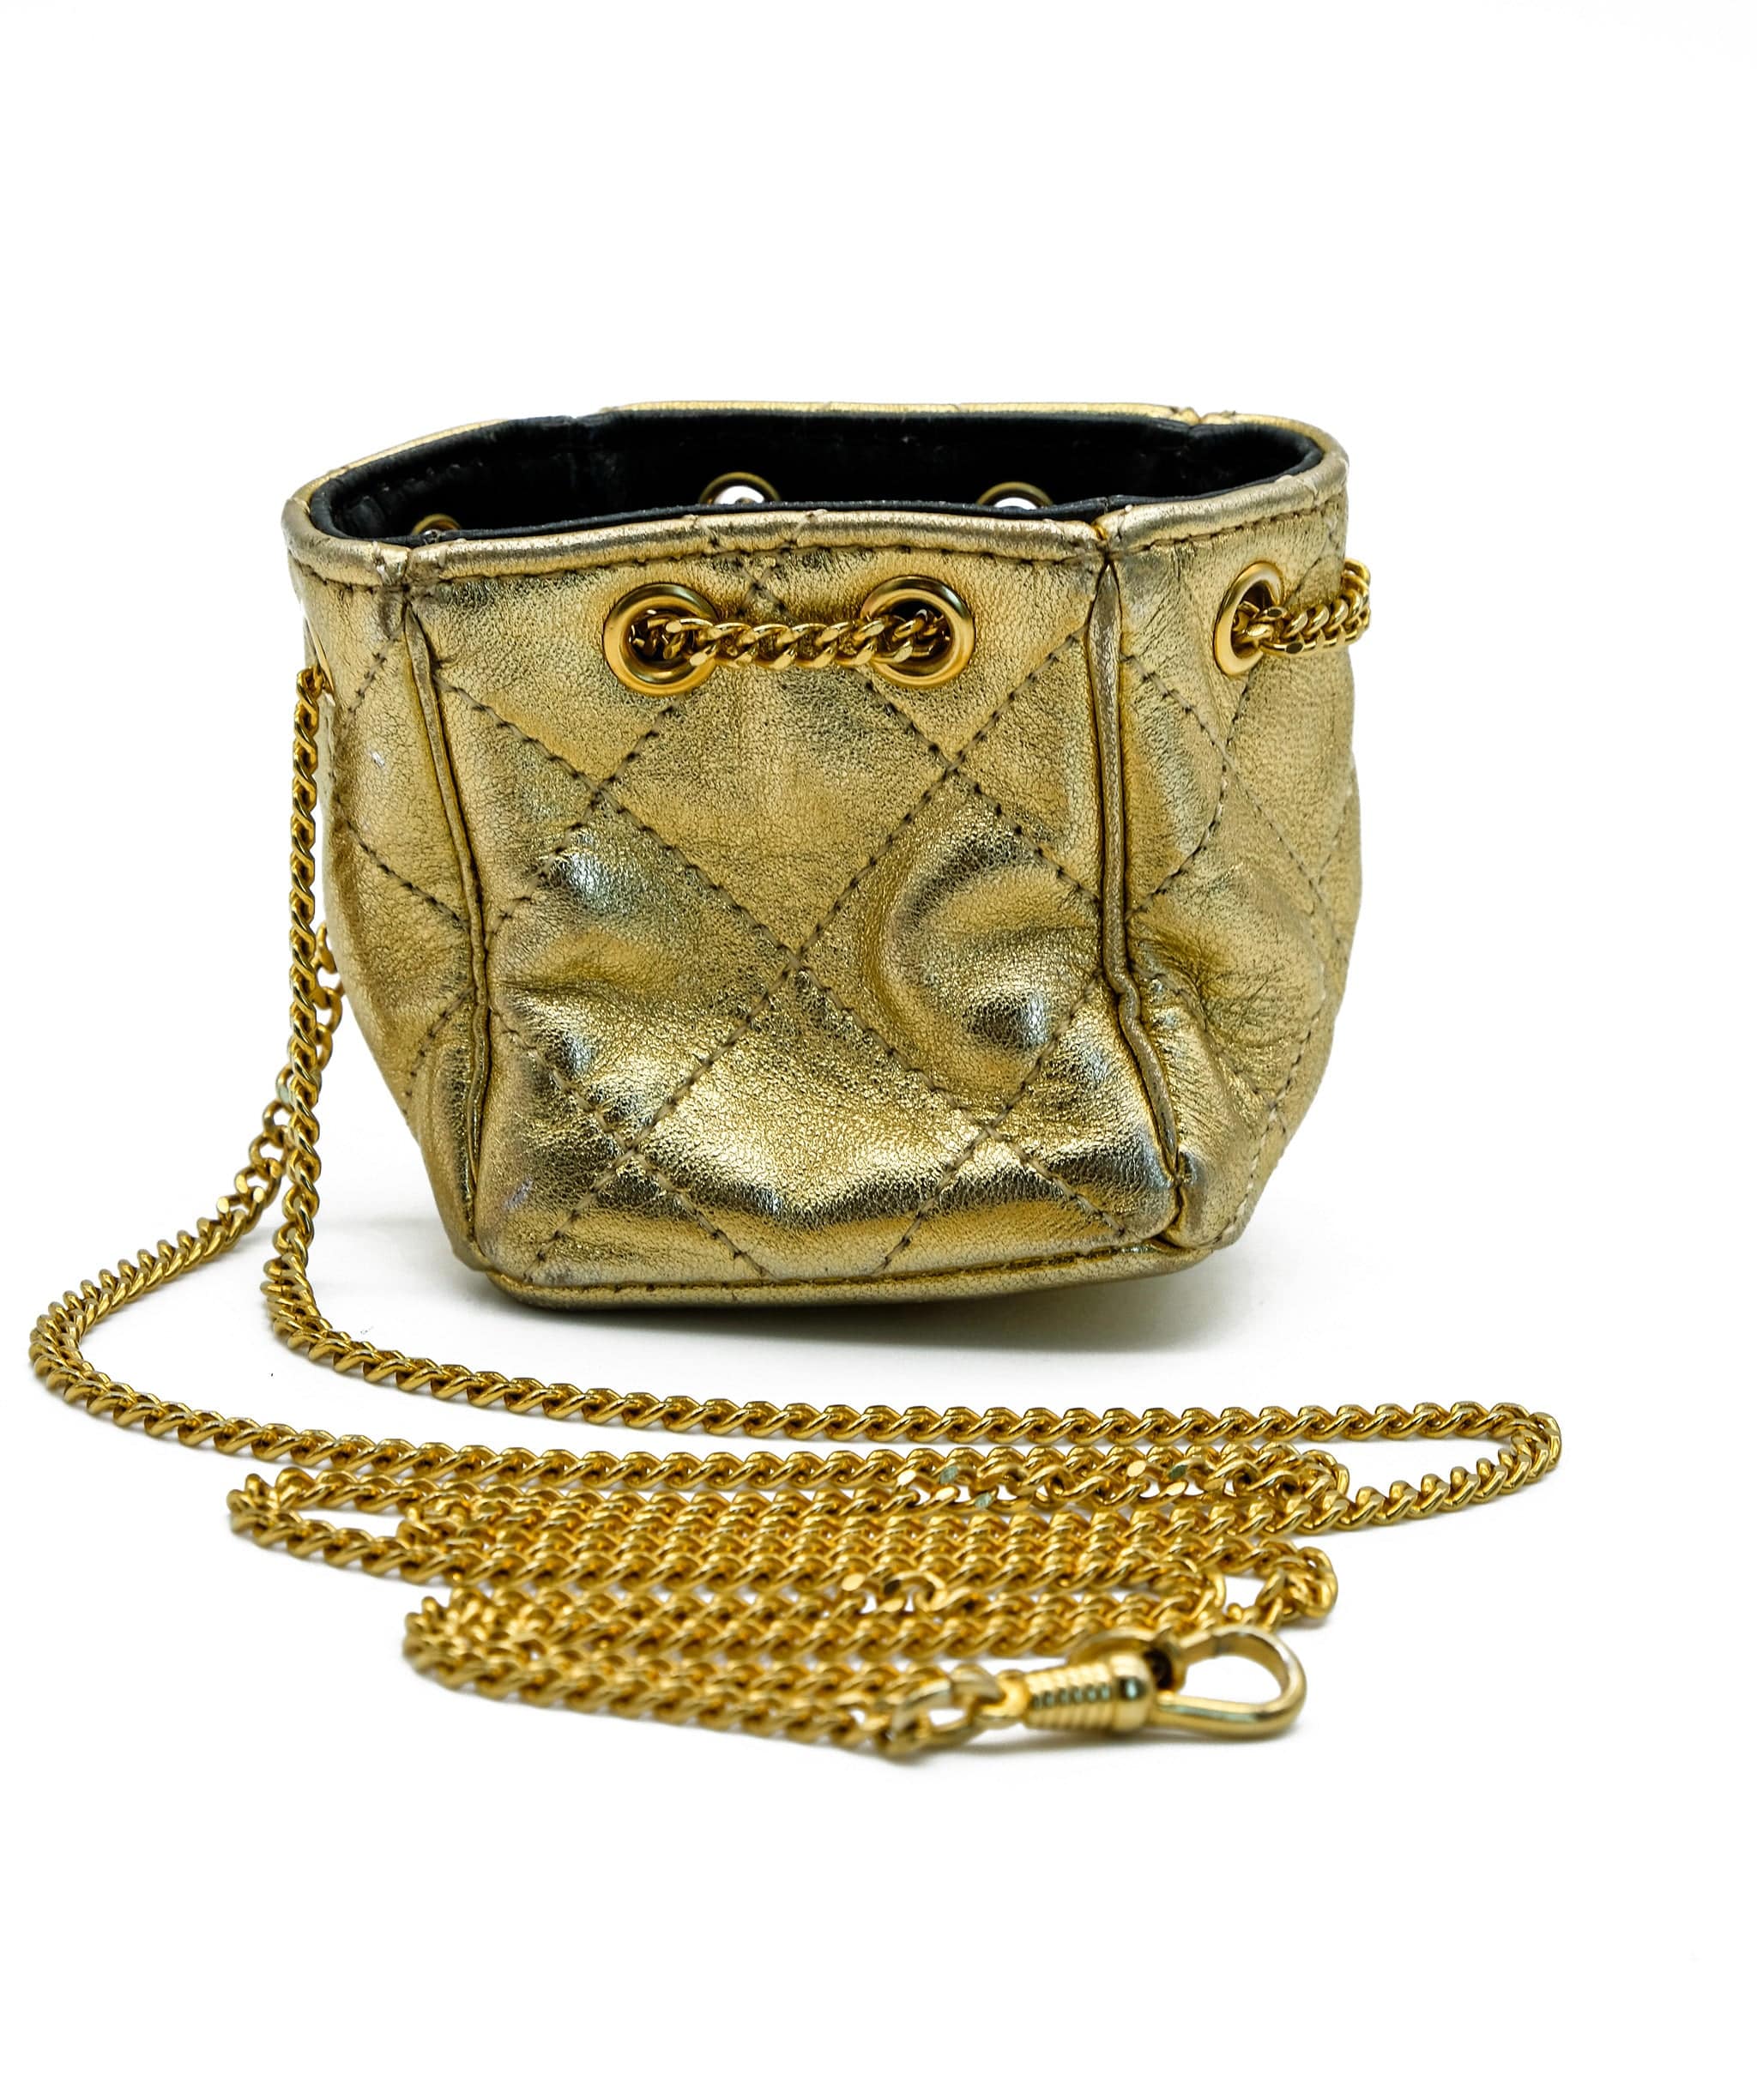 Chanel Chanel mini gold necklace bag - AWL4047